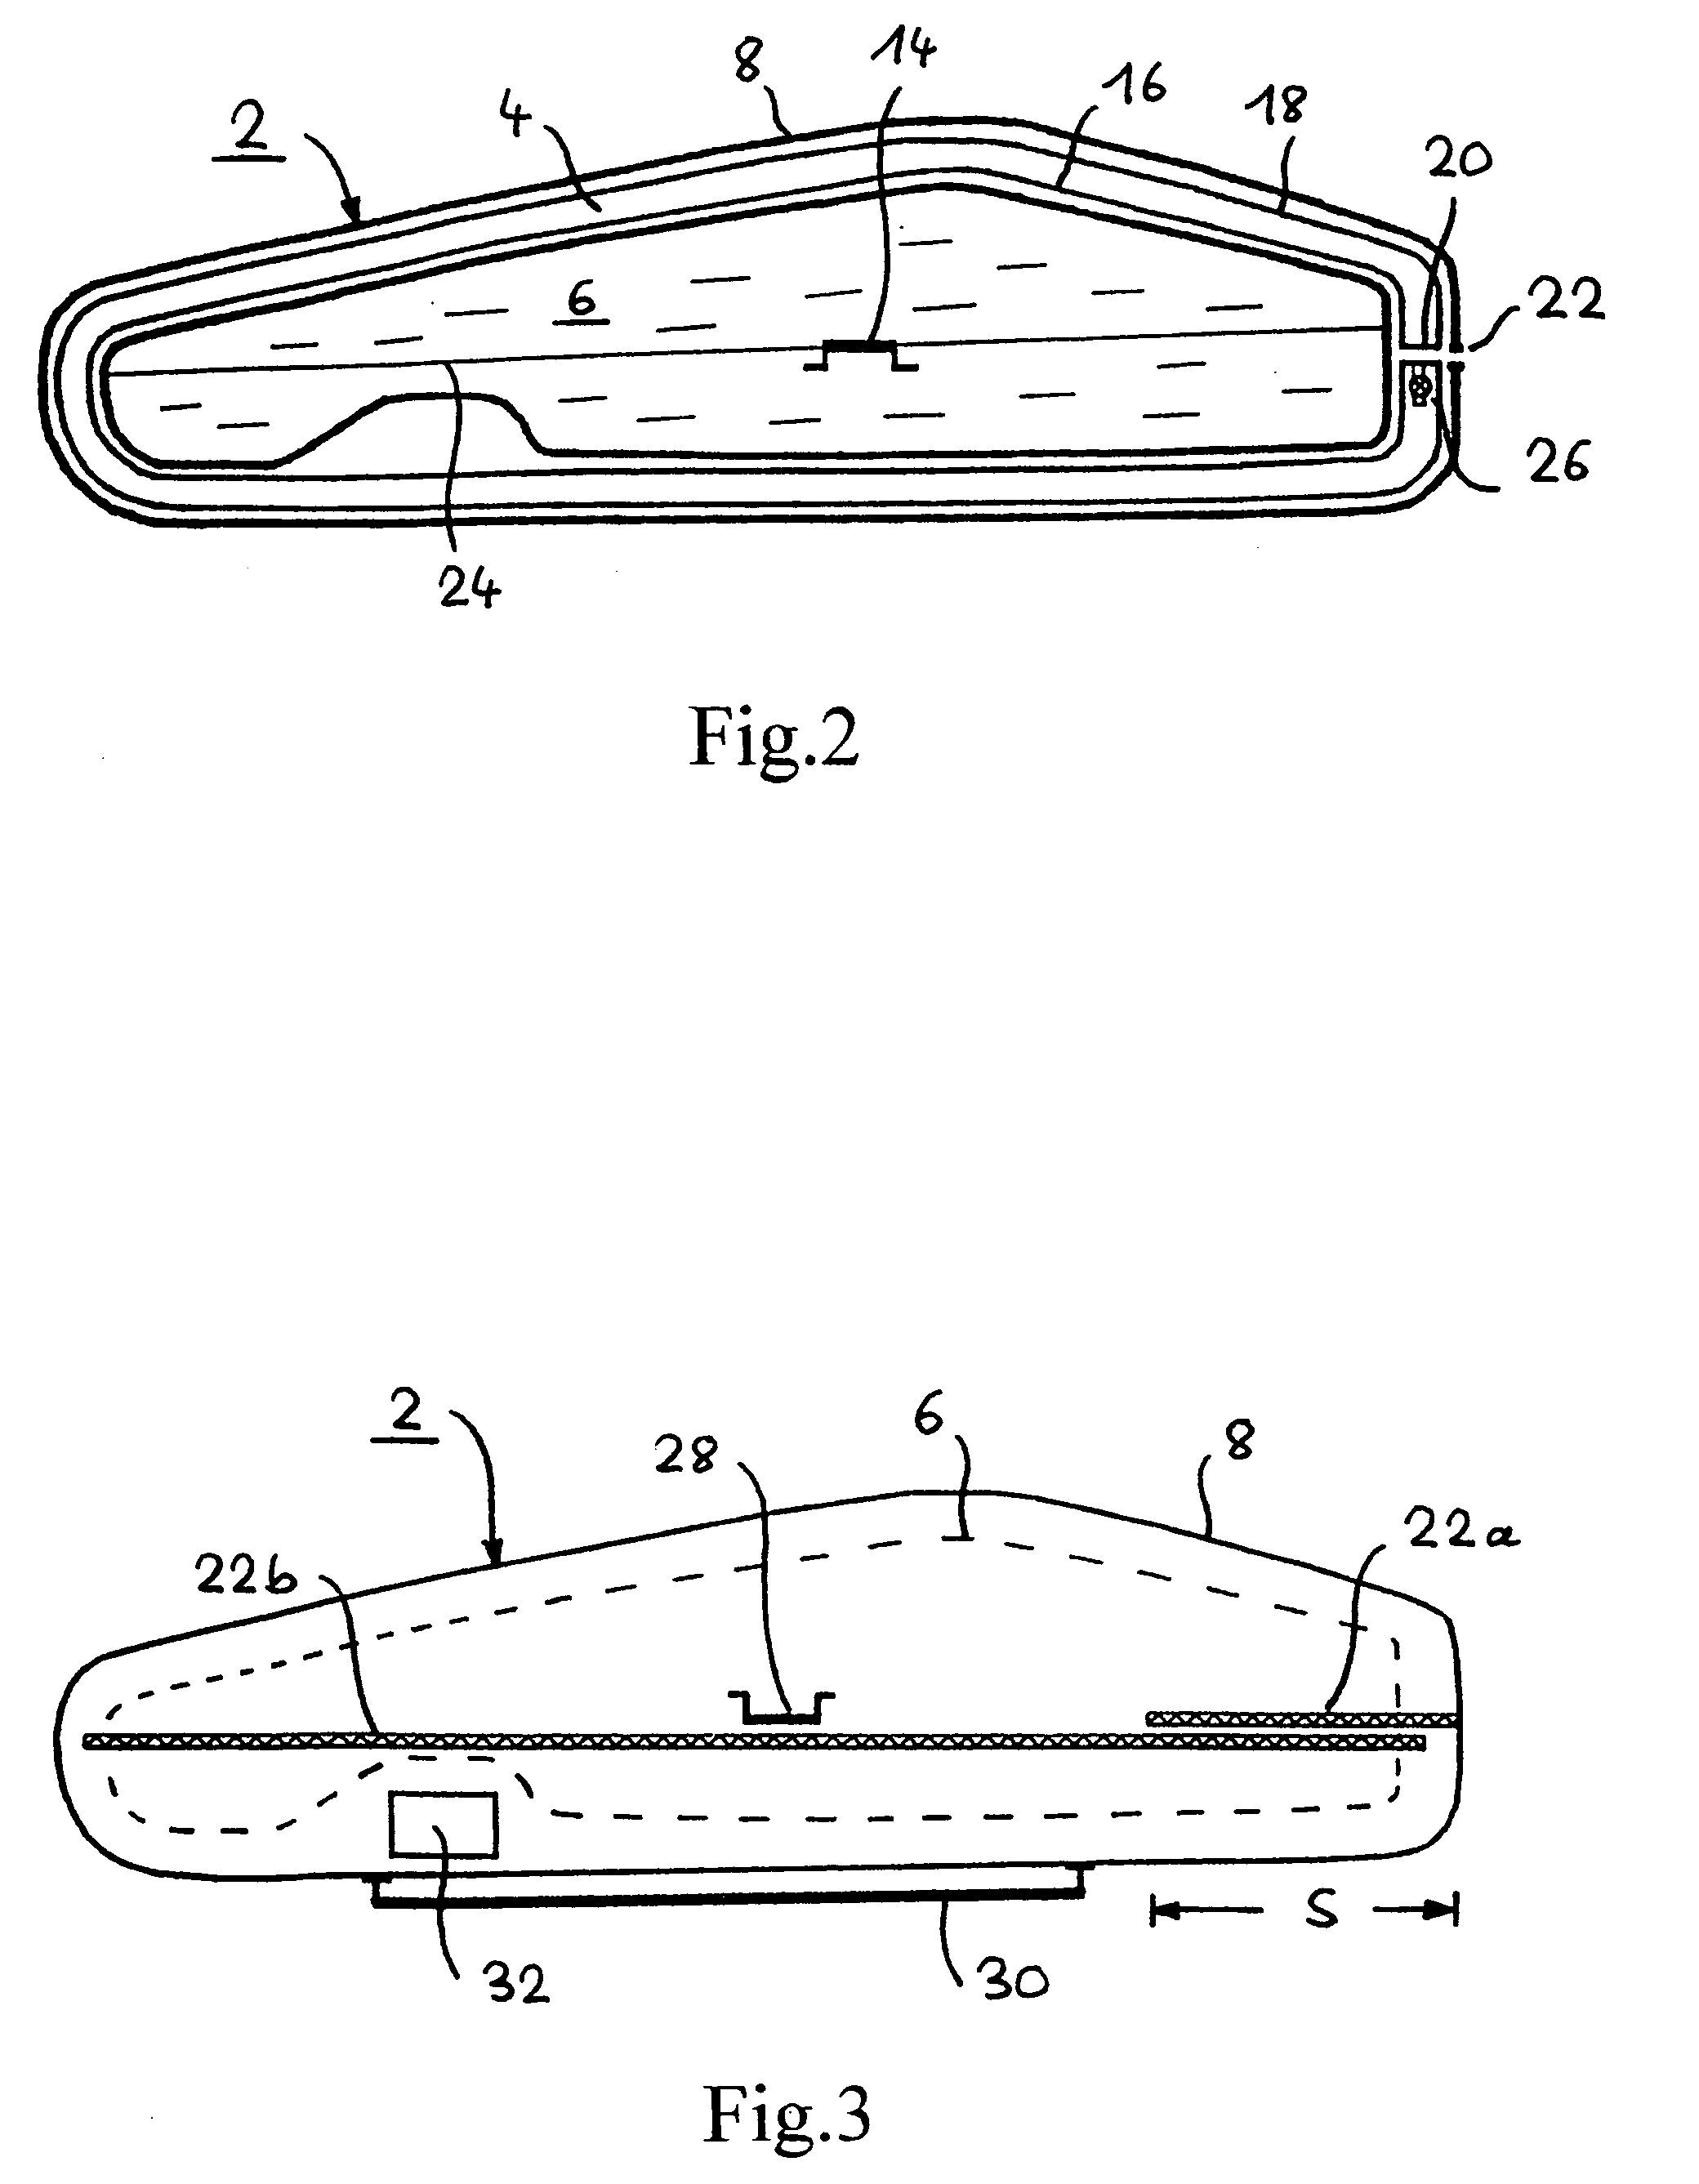 Transportation device for a musical instrument